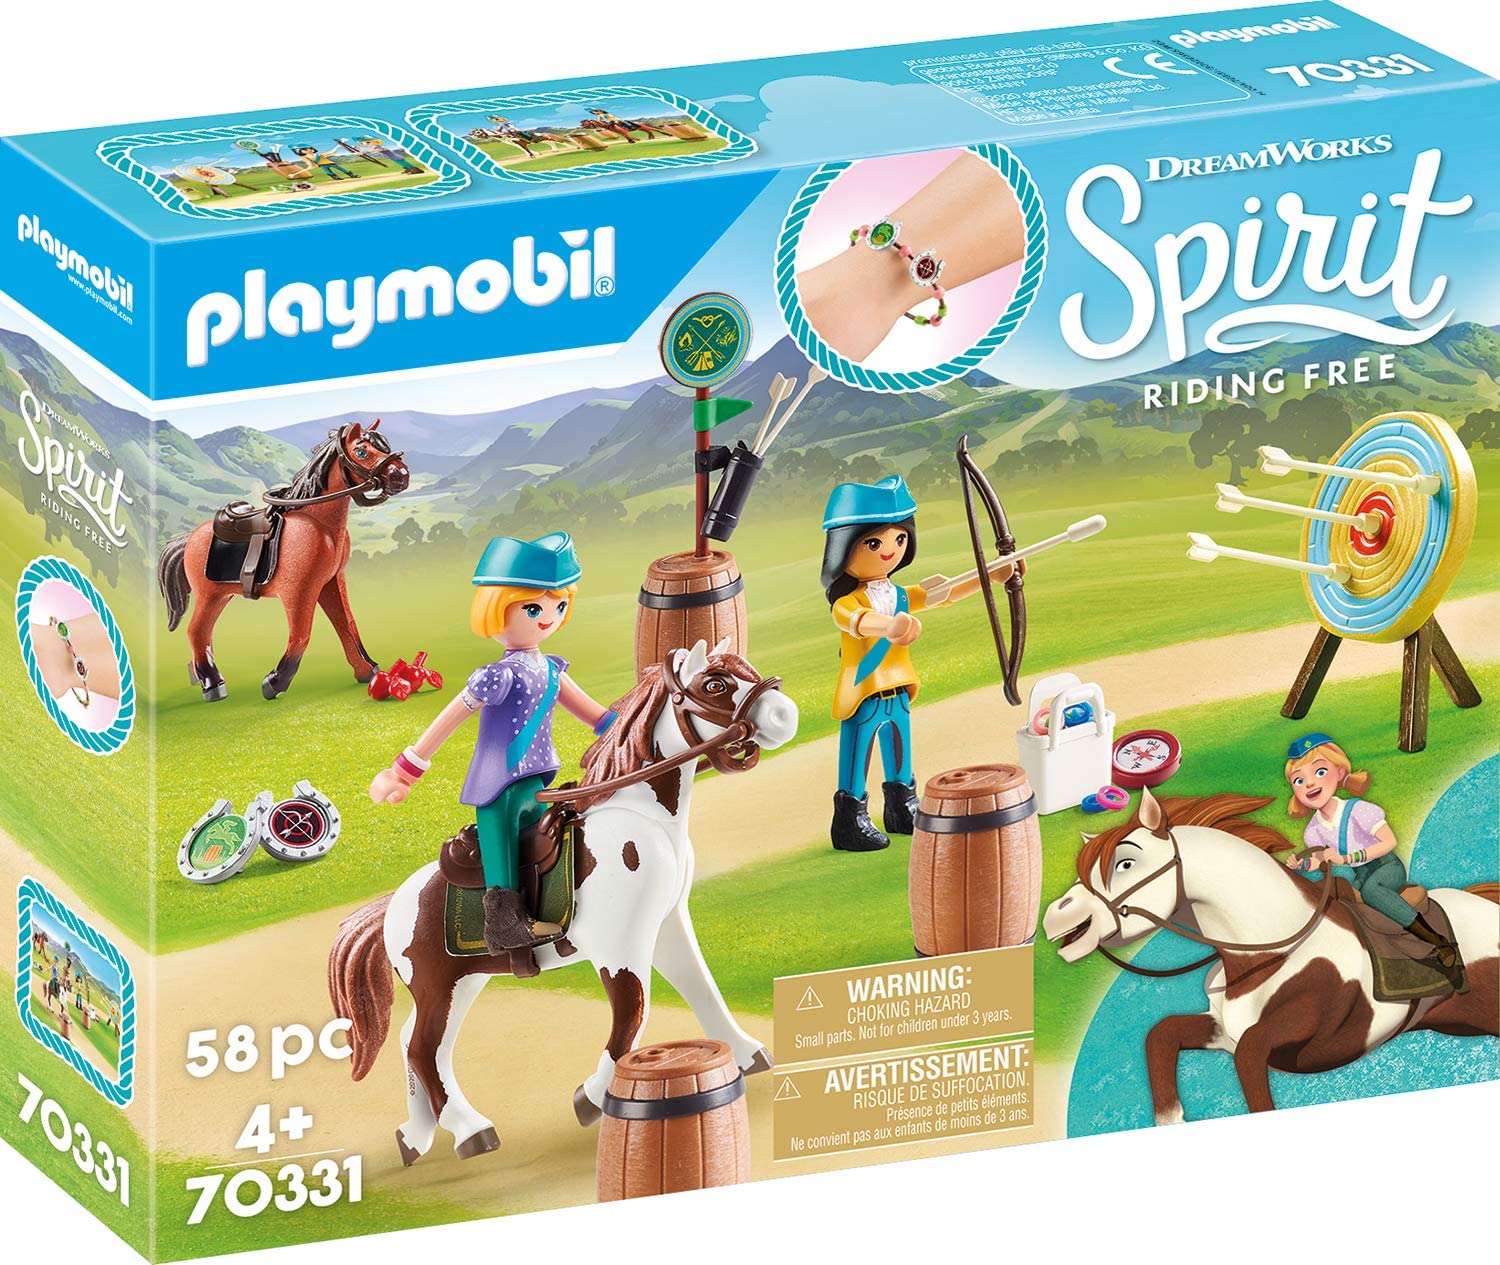 Playmobil 70331 Dreamworks Spirit Outdoor Adventure With Abigail And Boomer